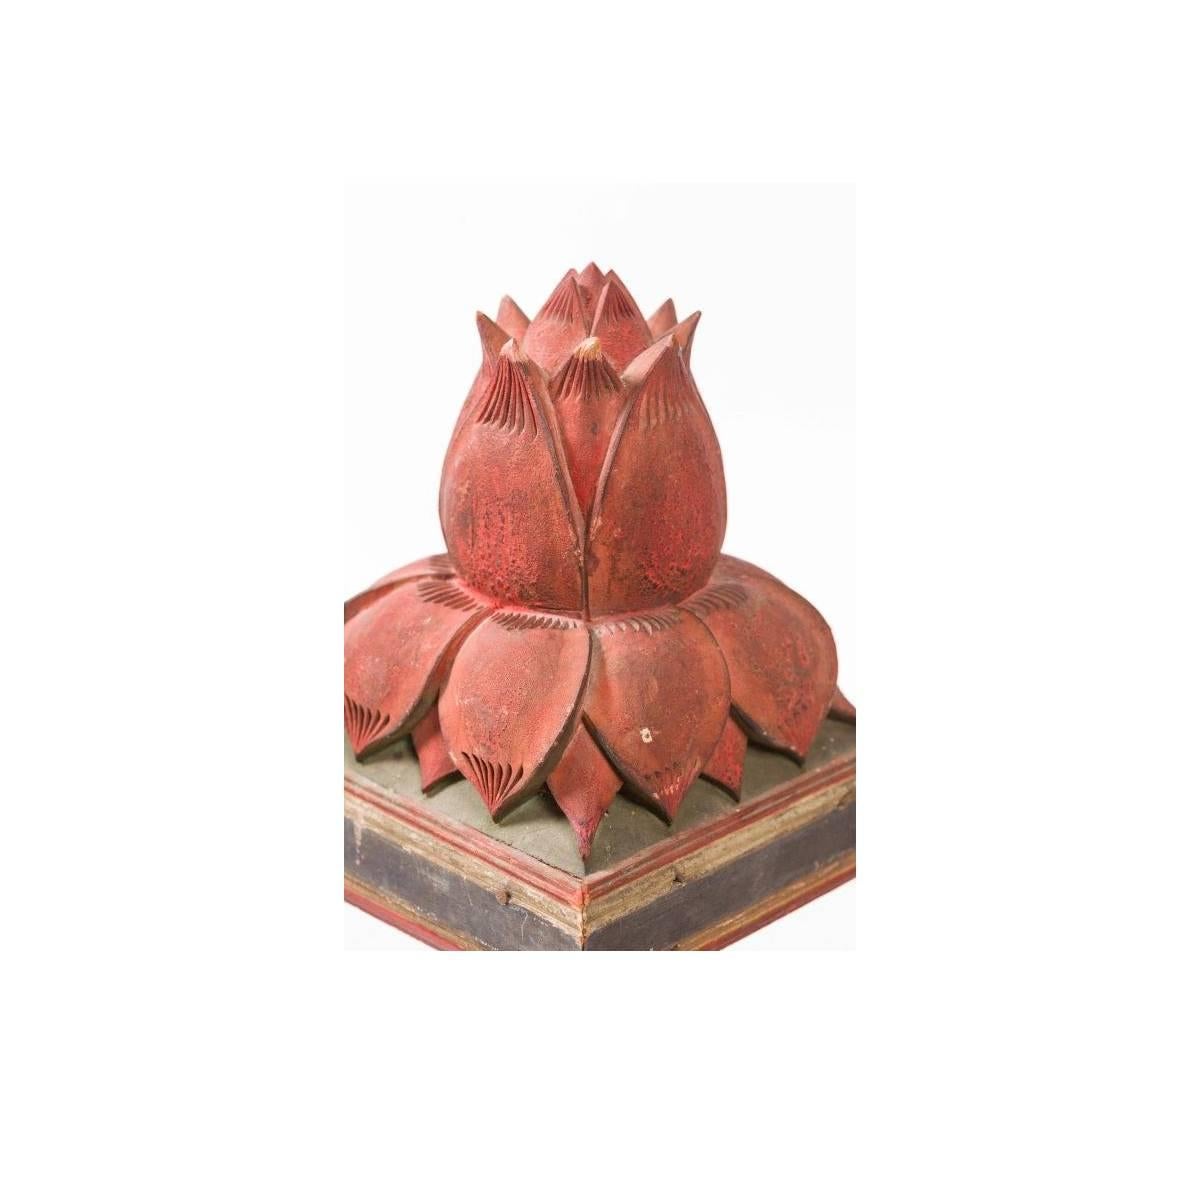 Pair of Asian lotus form finials. Carved and painted wood.

Dimensions: 8" H x 6" D x 6" W.